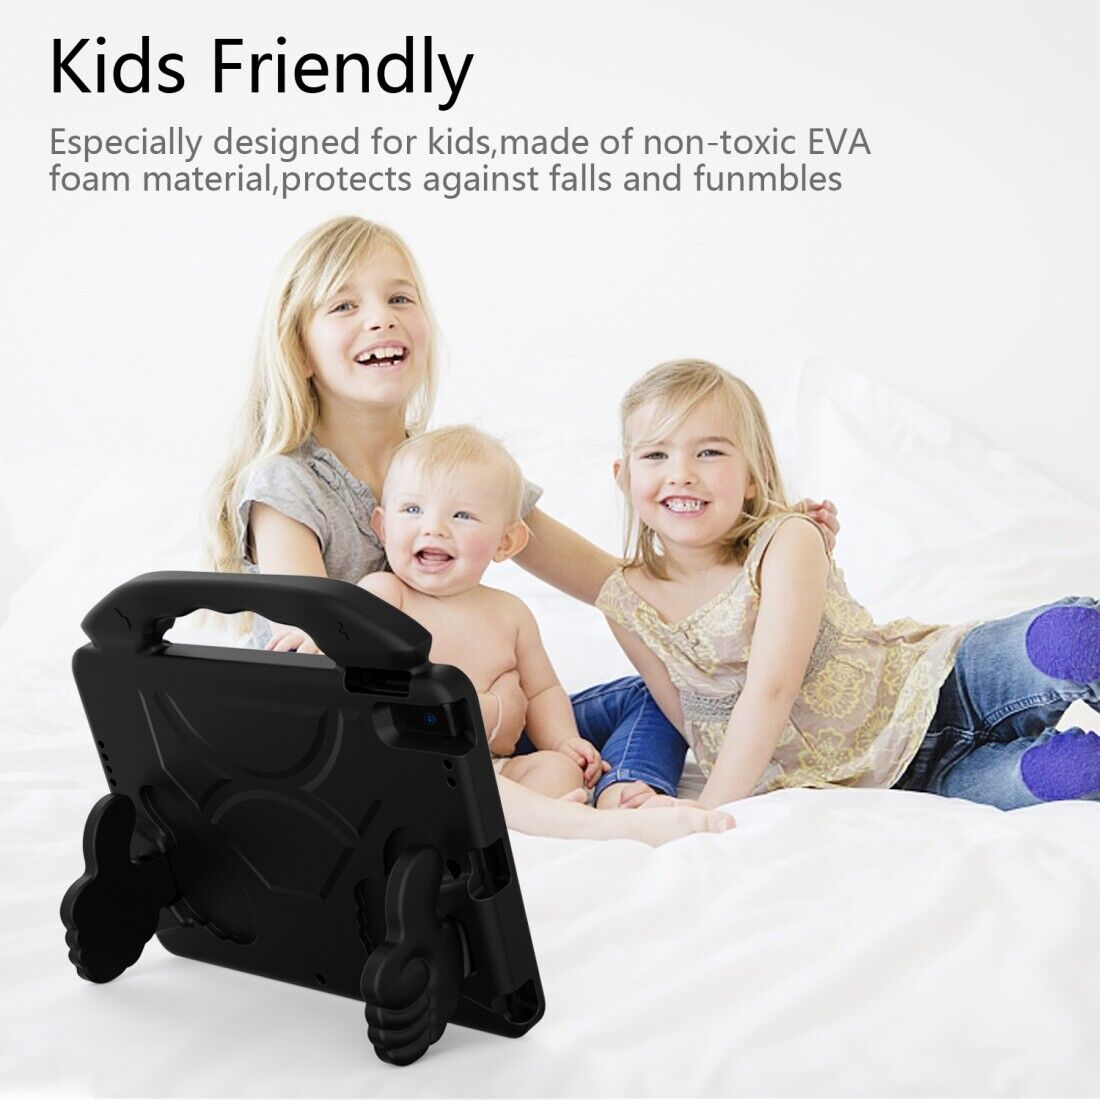 For Apple iPad 10.2 8th Gen 2020 Kids Friendly Case Shockproof Cover With Thumbs Up - Black-www.firsthelptech.ie